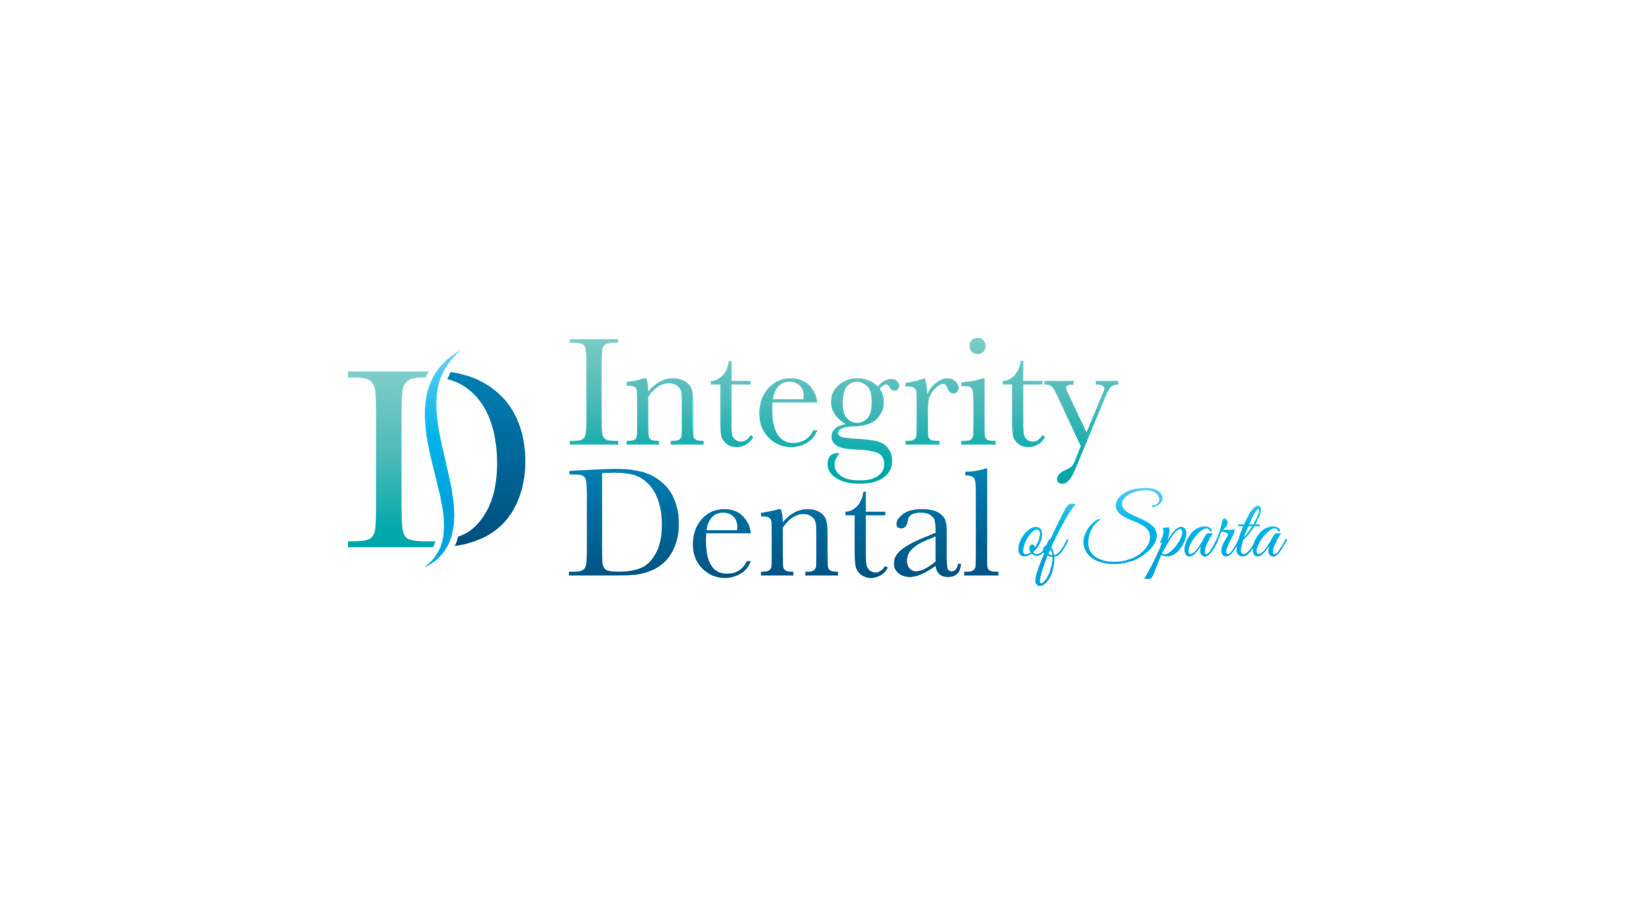 Premier Care Dental Management expands to it’s 11th county in New Jersey and Acquires Integrity Dental of Sparta, Paving the Way for Dental365 Expansion.